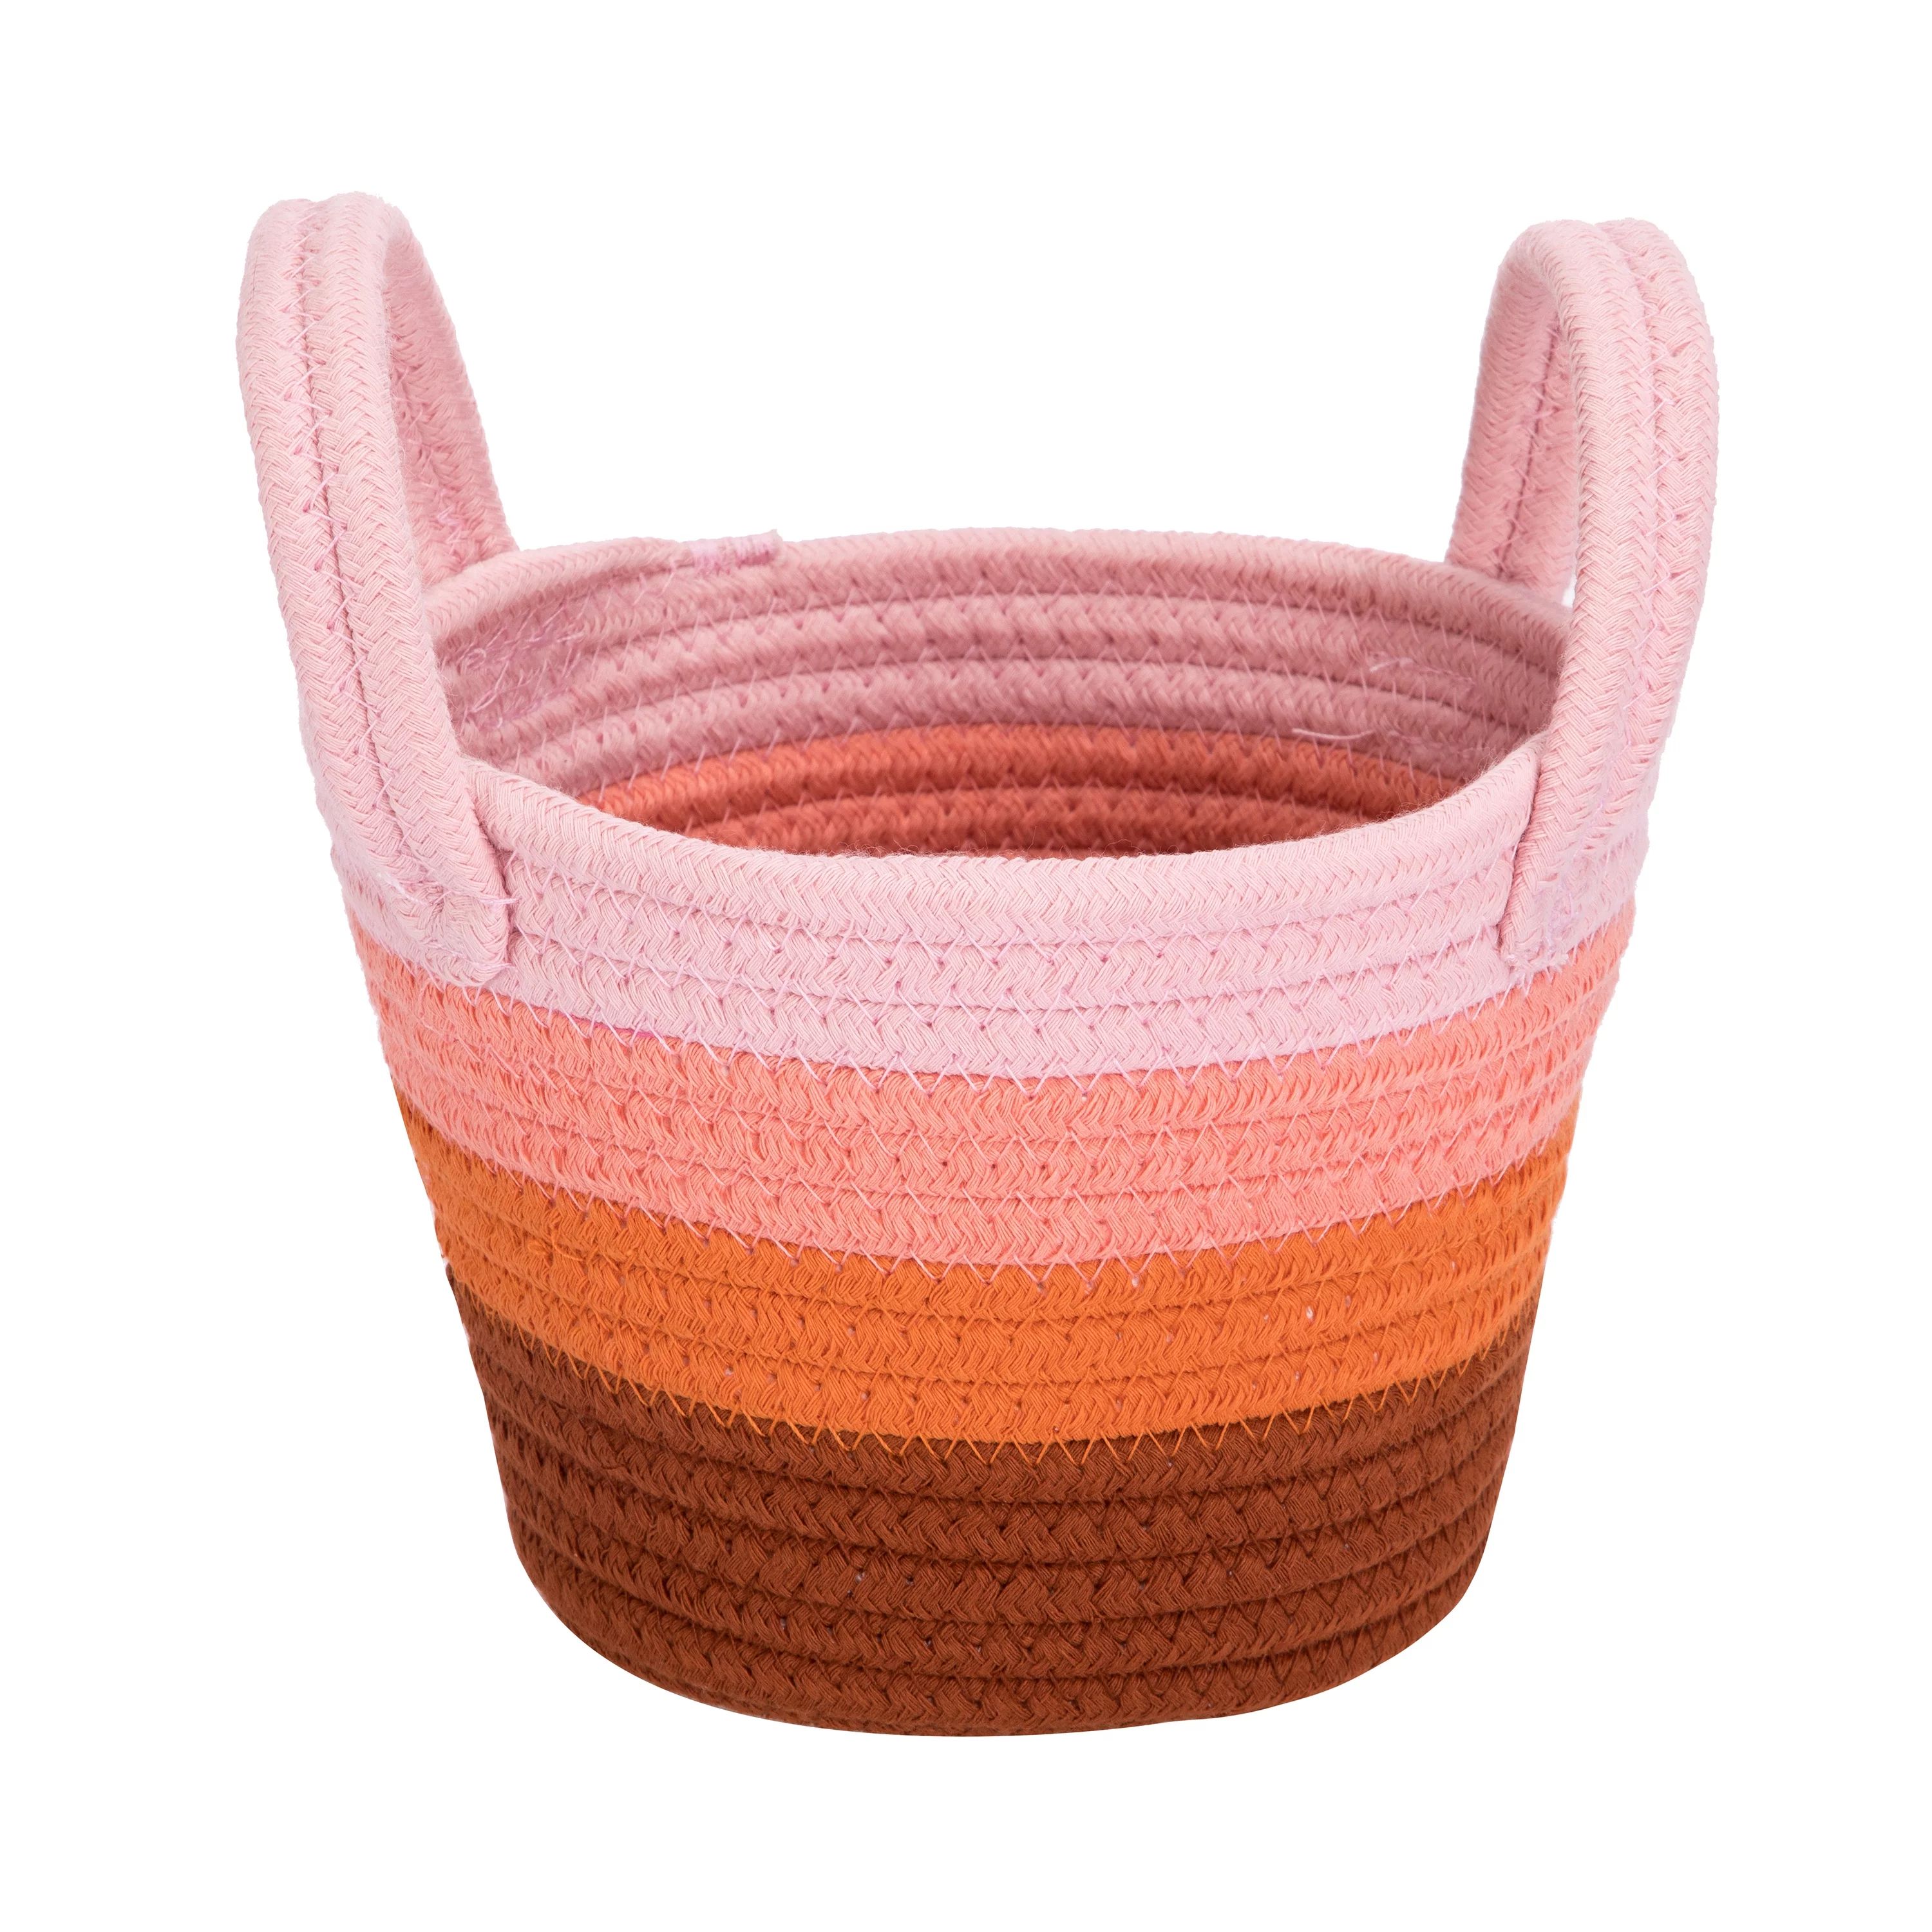 Way To Celebrate Easter Cotton Rope Basket, Large, Multicolored | Walmart (US)